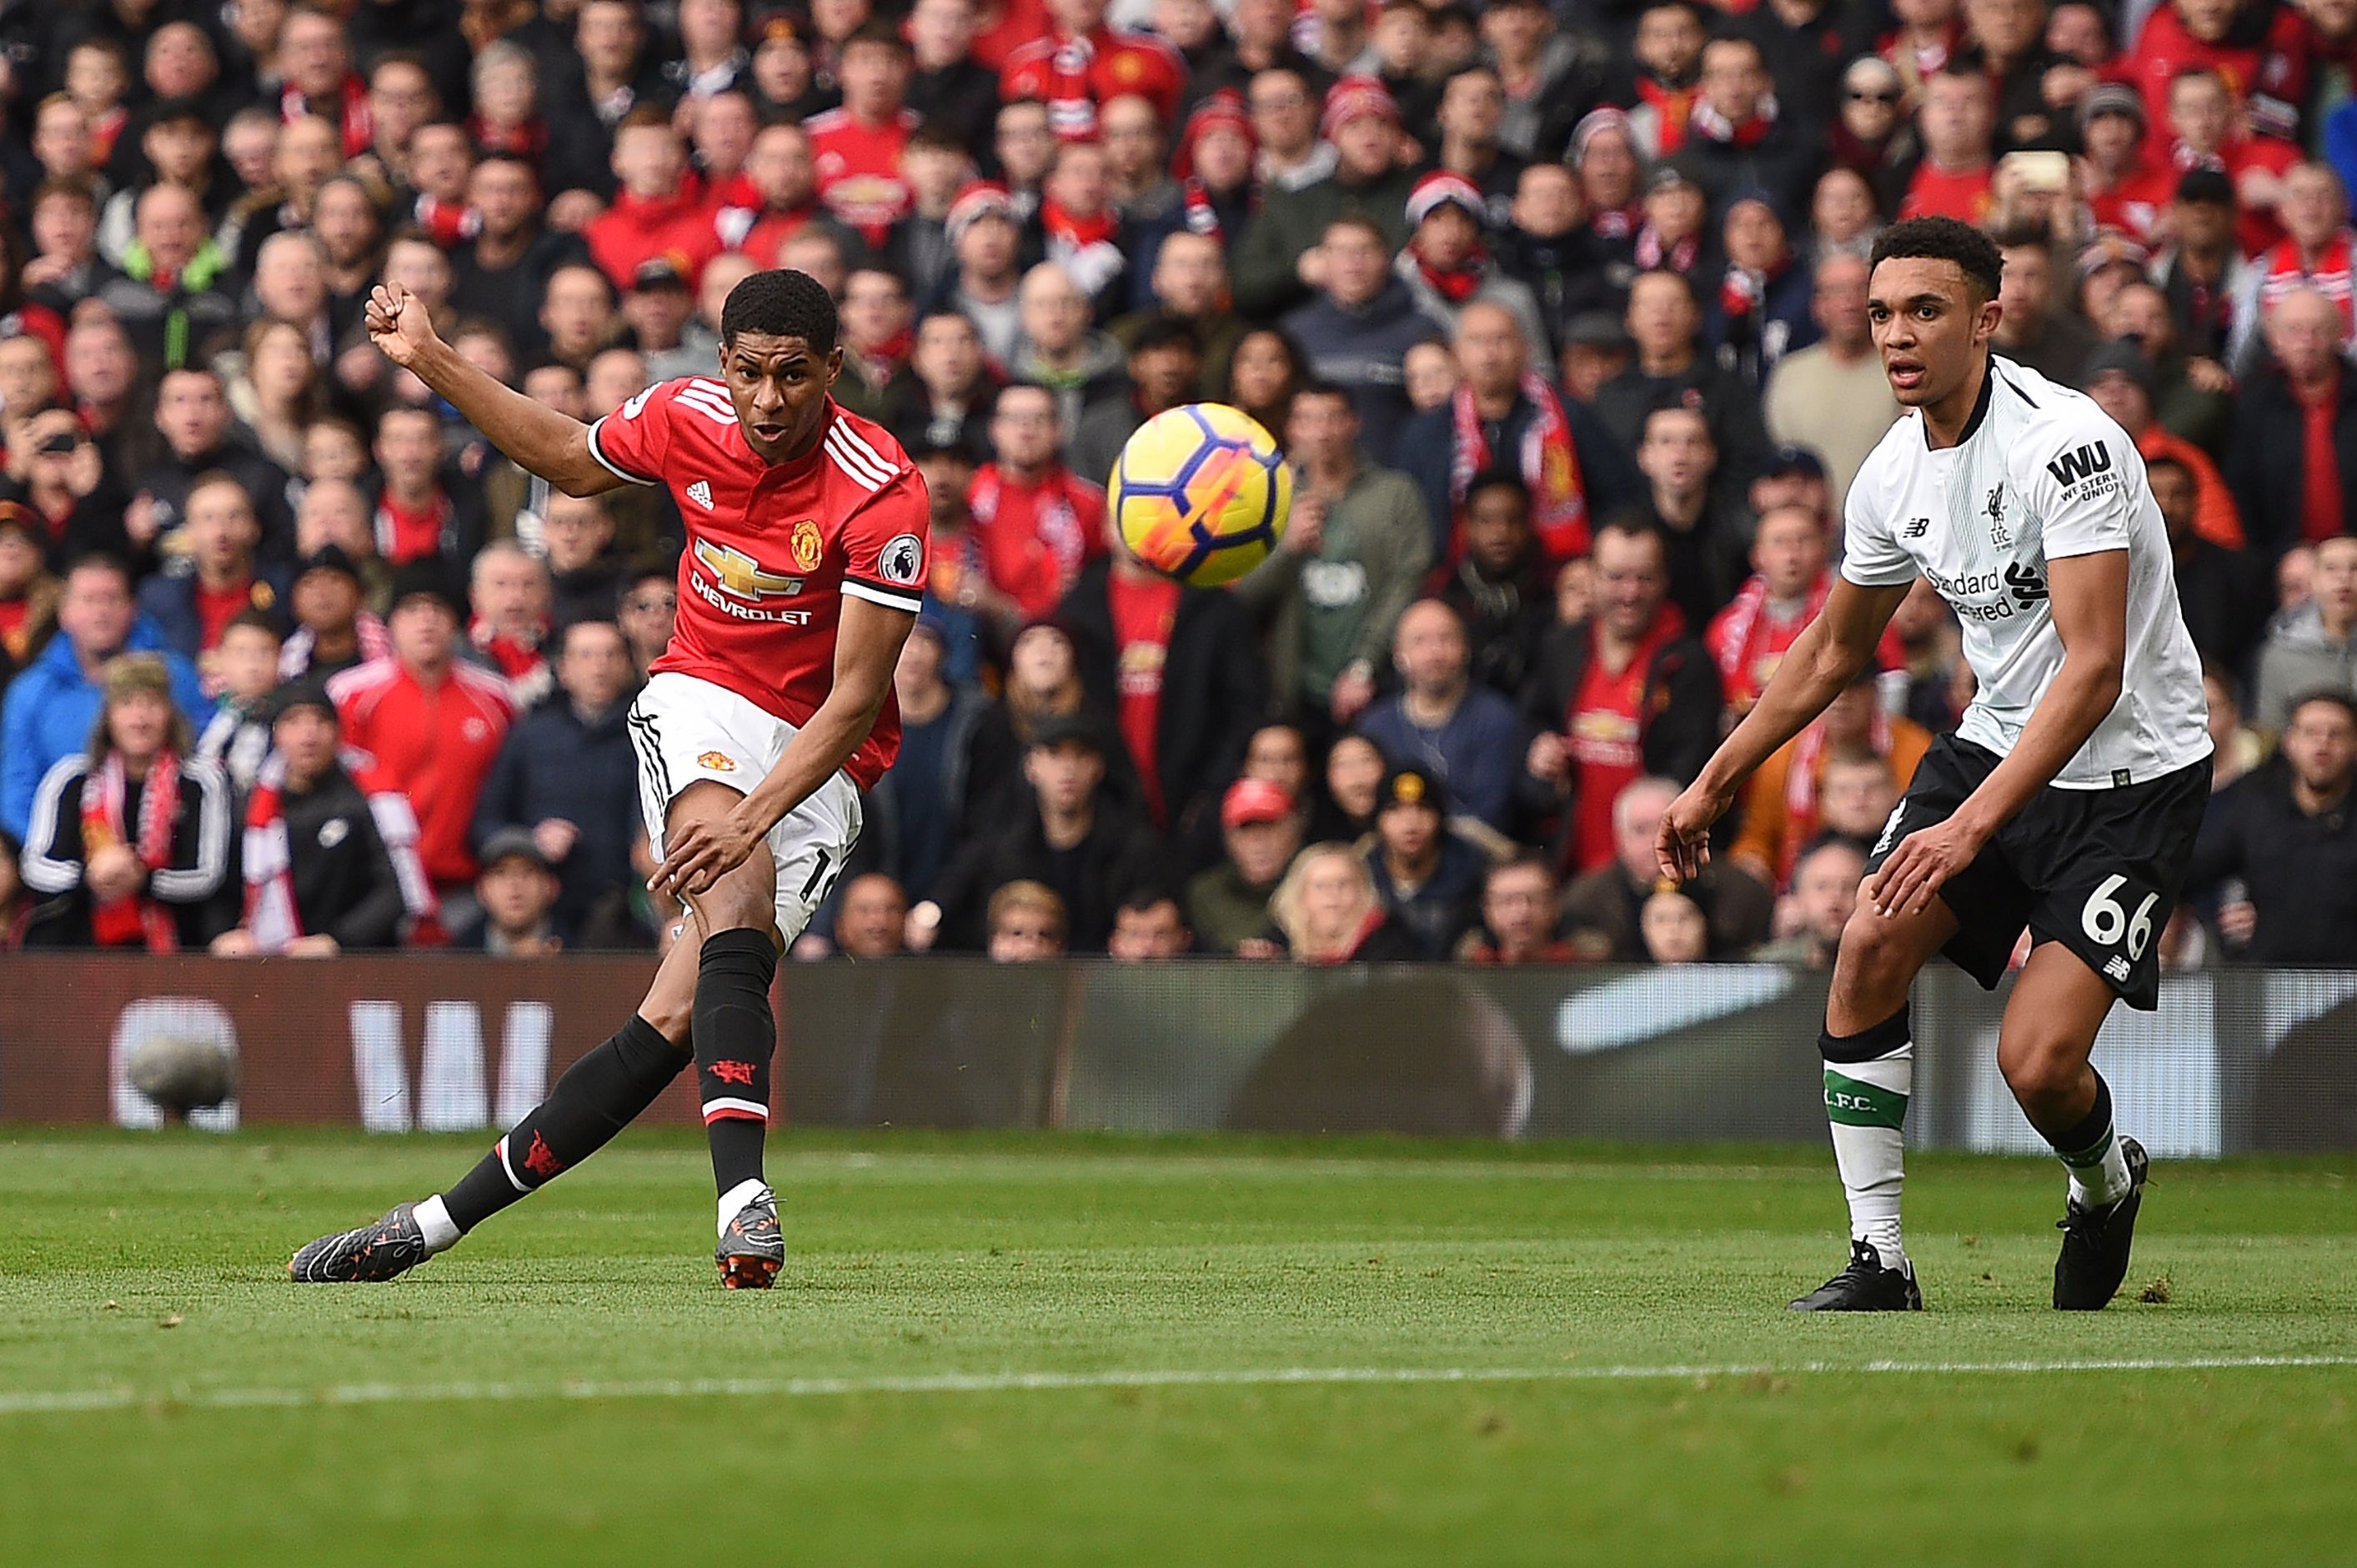 Marcus Rashford confirms Liverpool as the better rival and calls Manchester City a small club without history